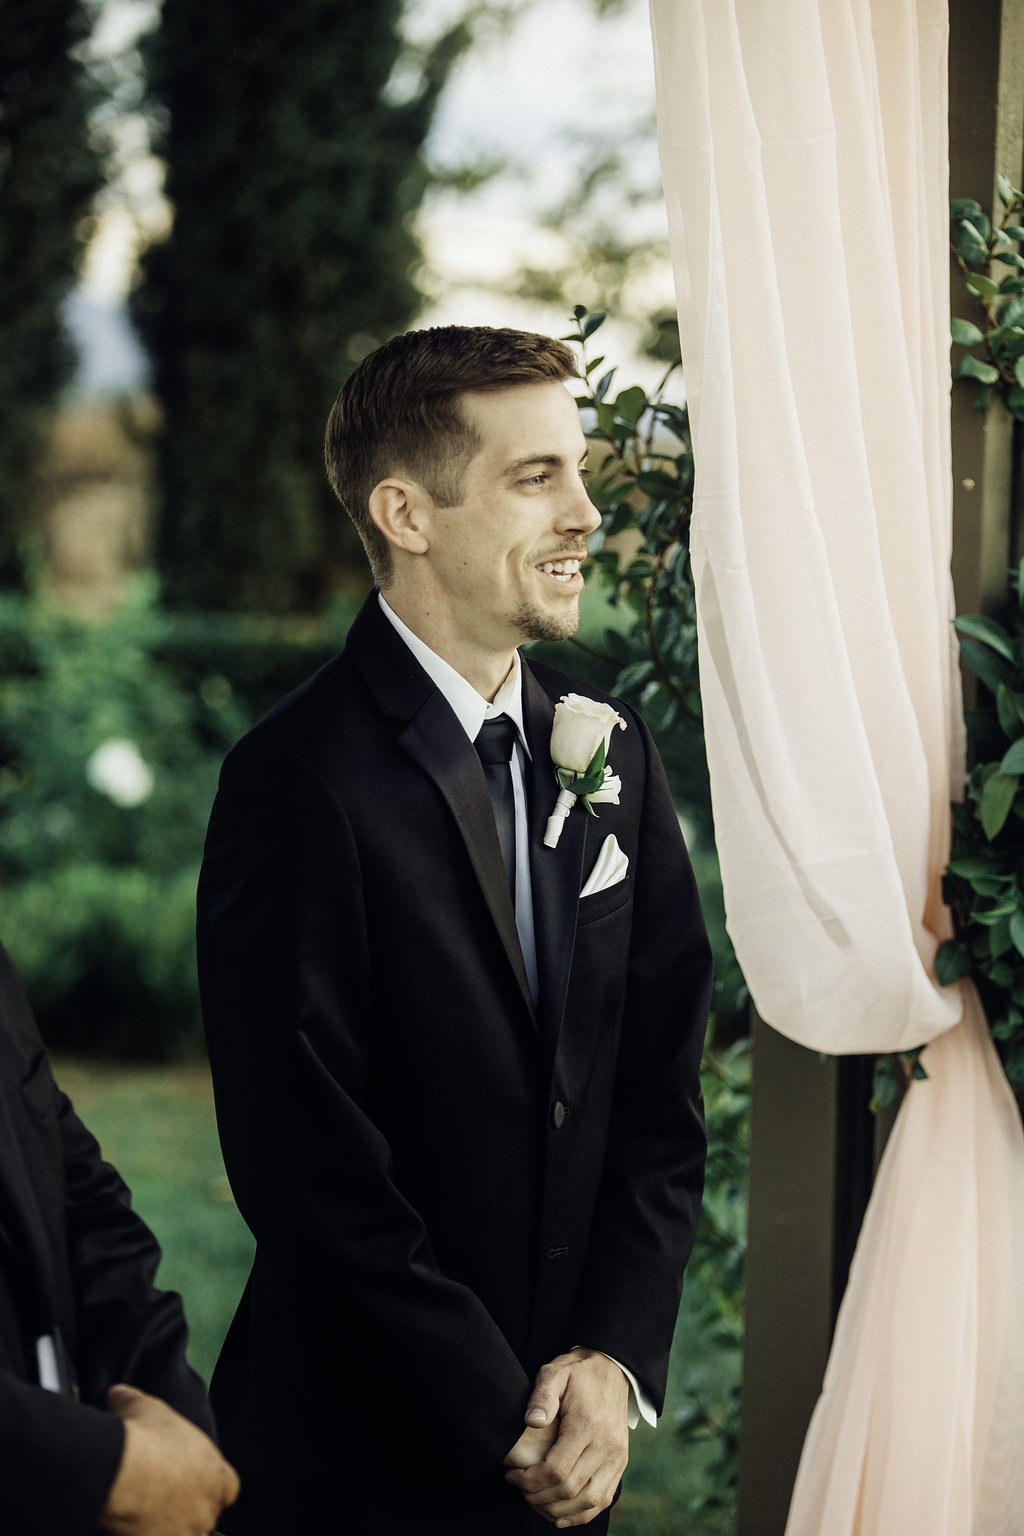 Wedding Photograph Of Man in Black Suit Smiling Los Angeles